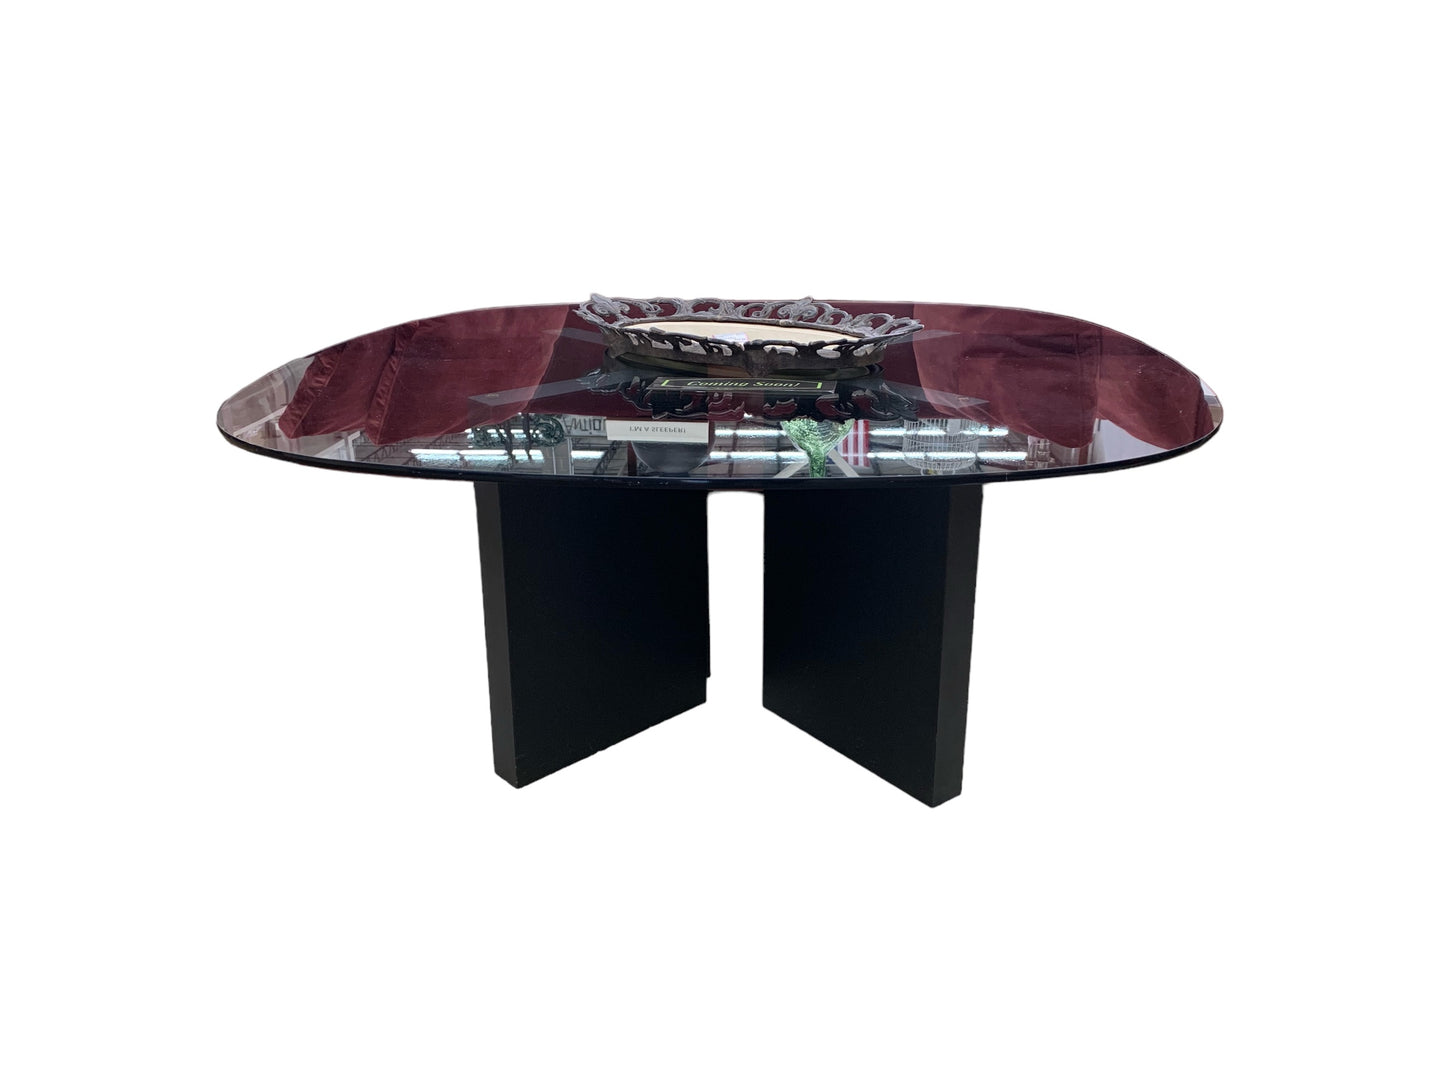 Rounded square glass-top coffee table w/ black "V" base, 42x42x18"